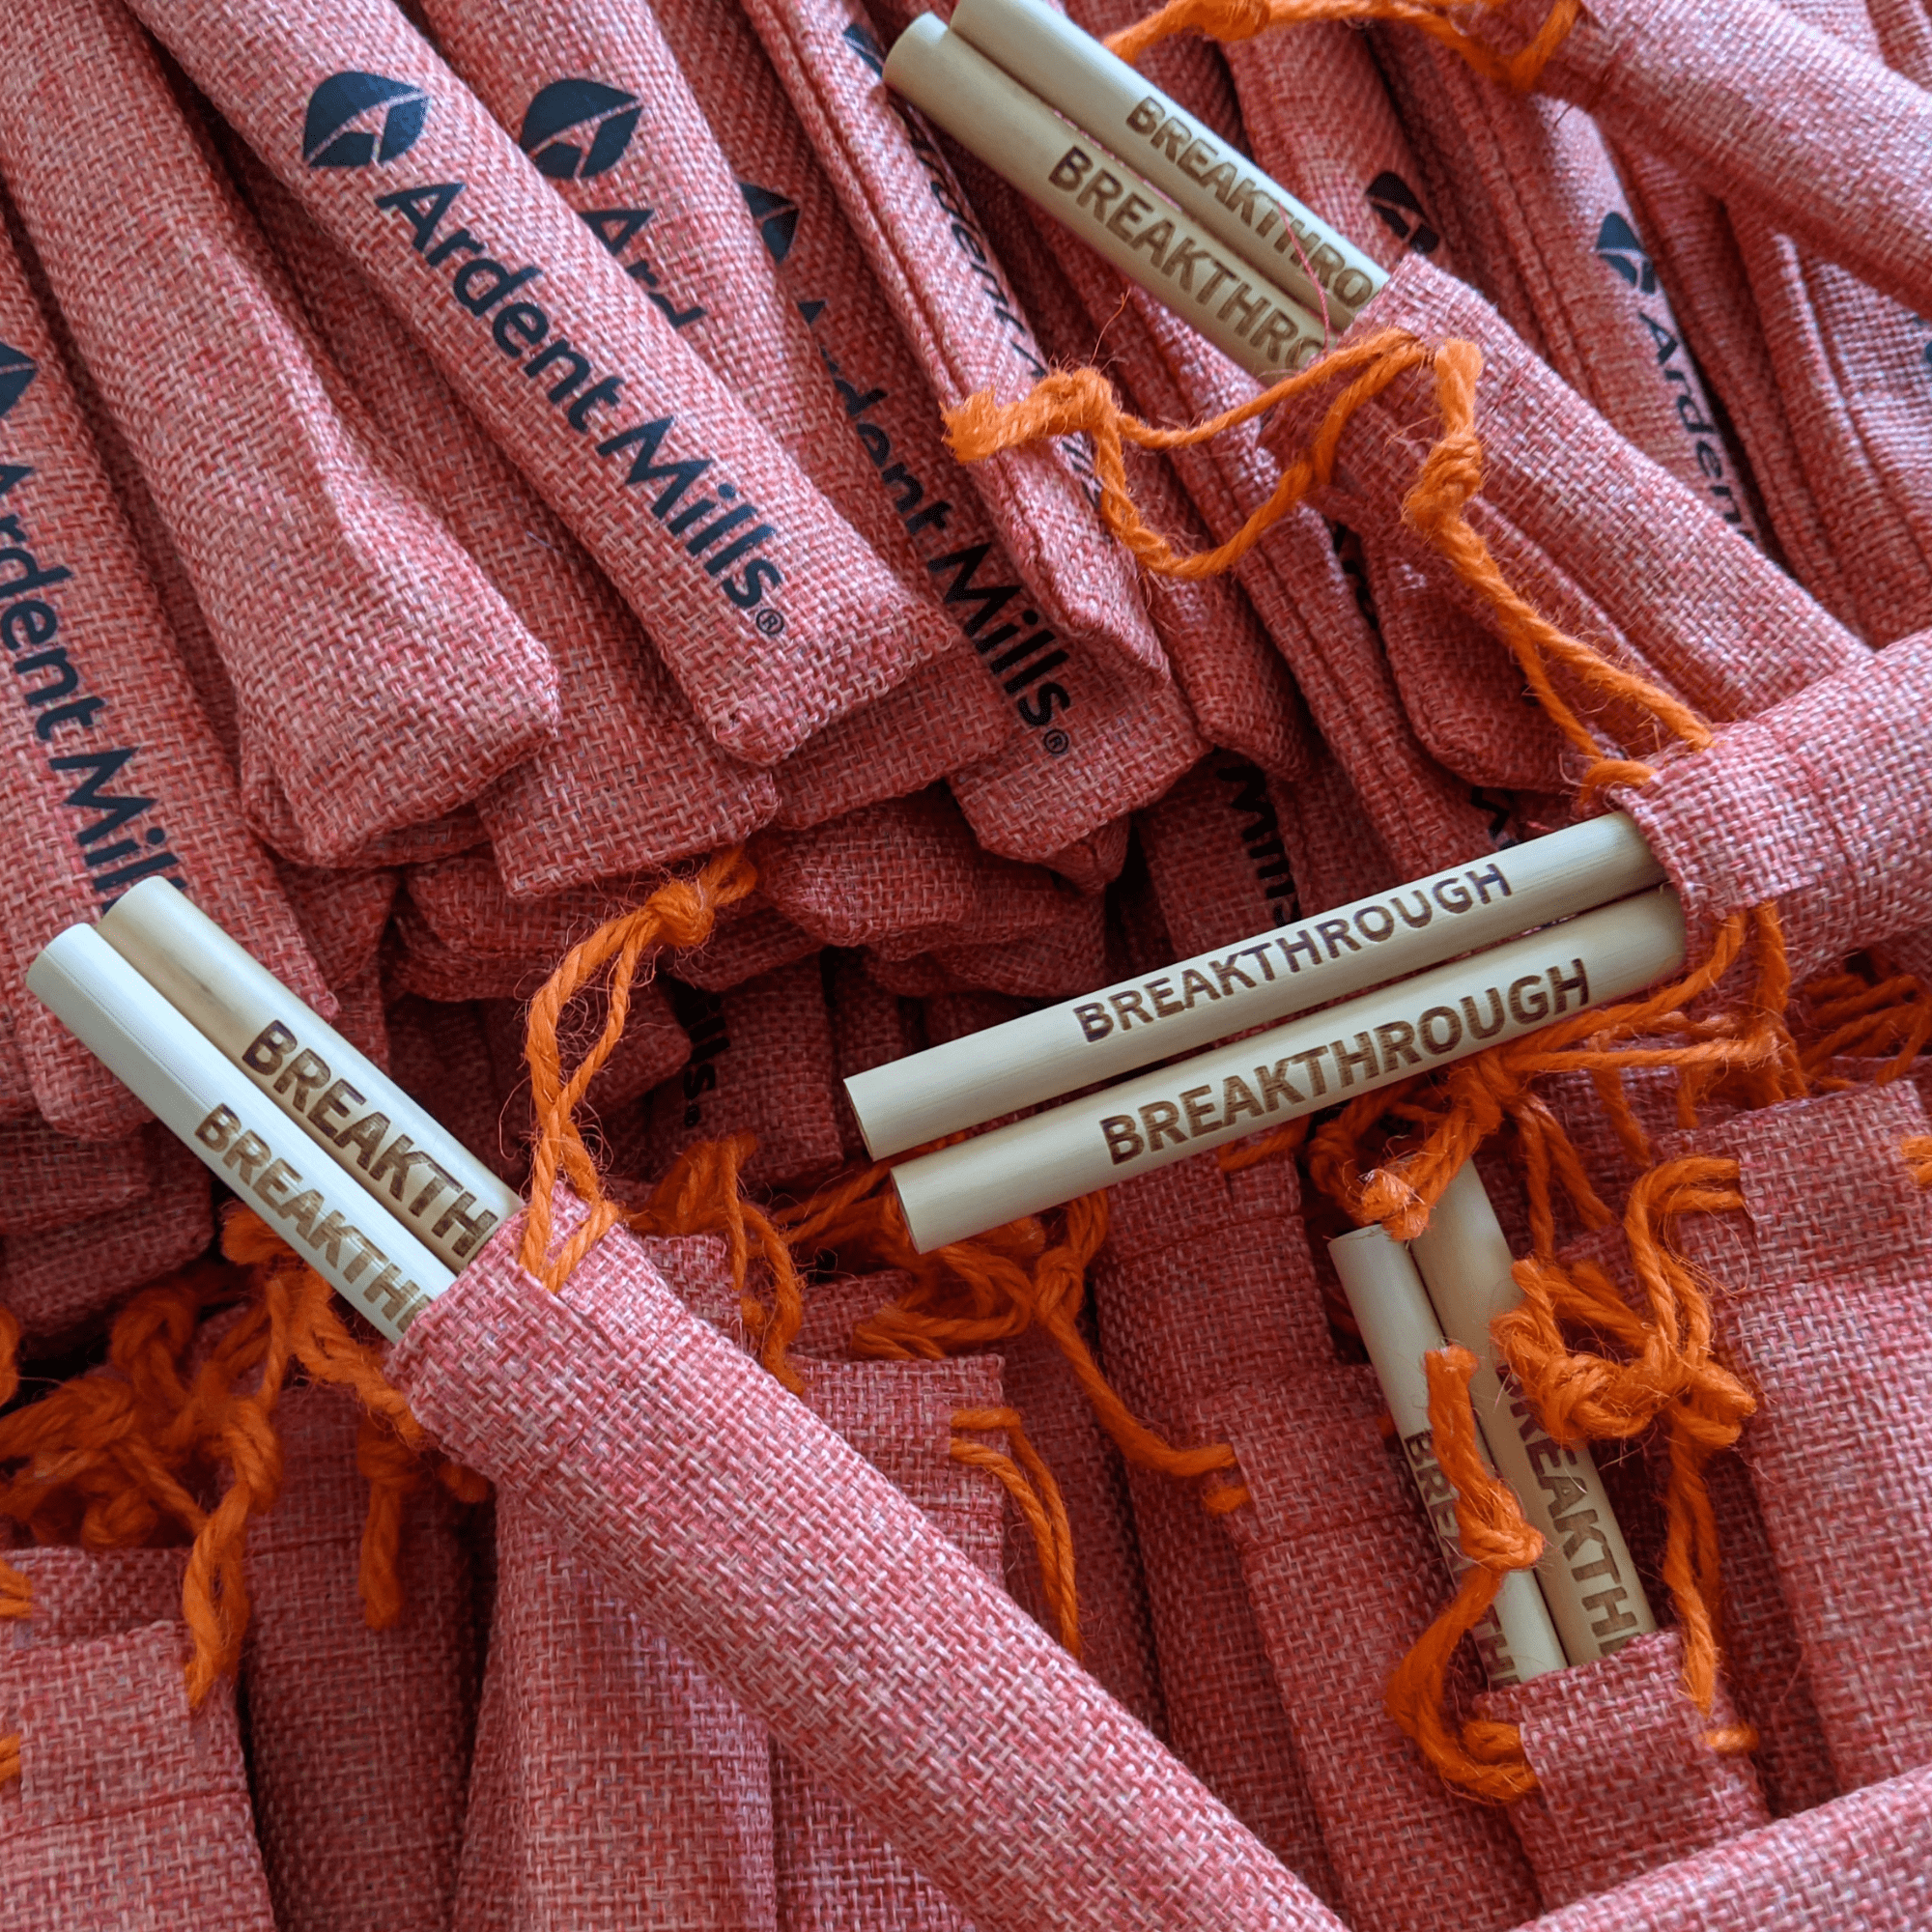 Ardent Mills branded pouches with Breakthrough straws